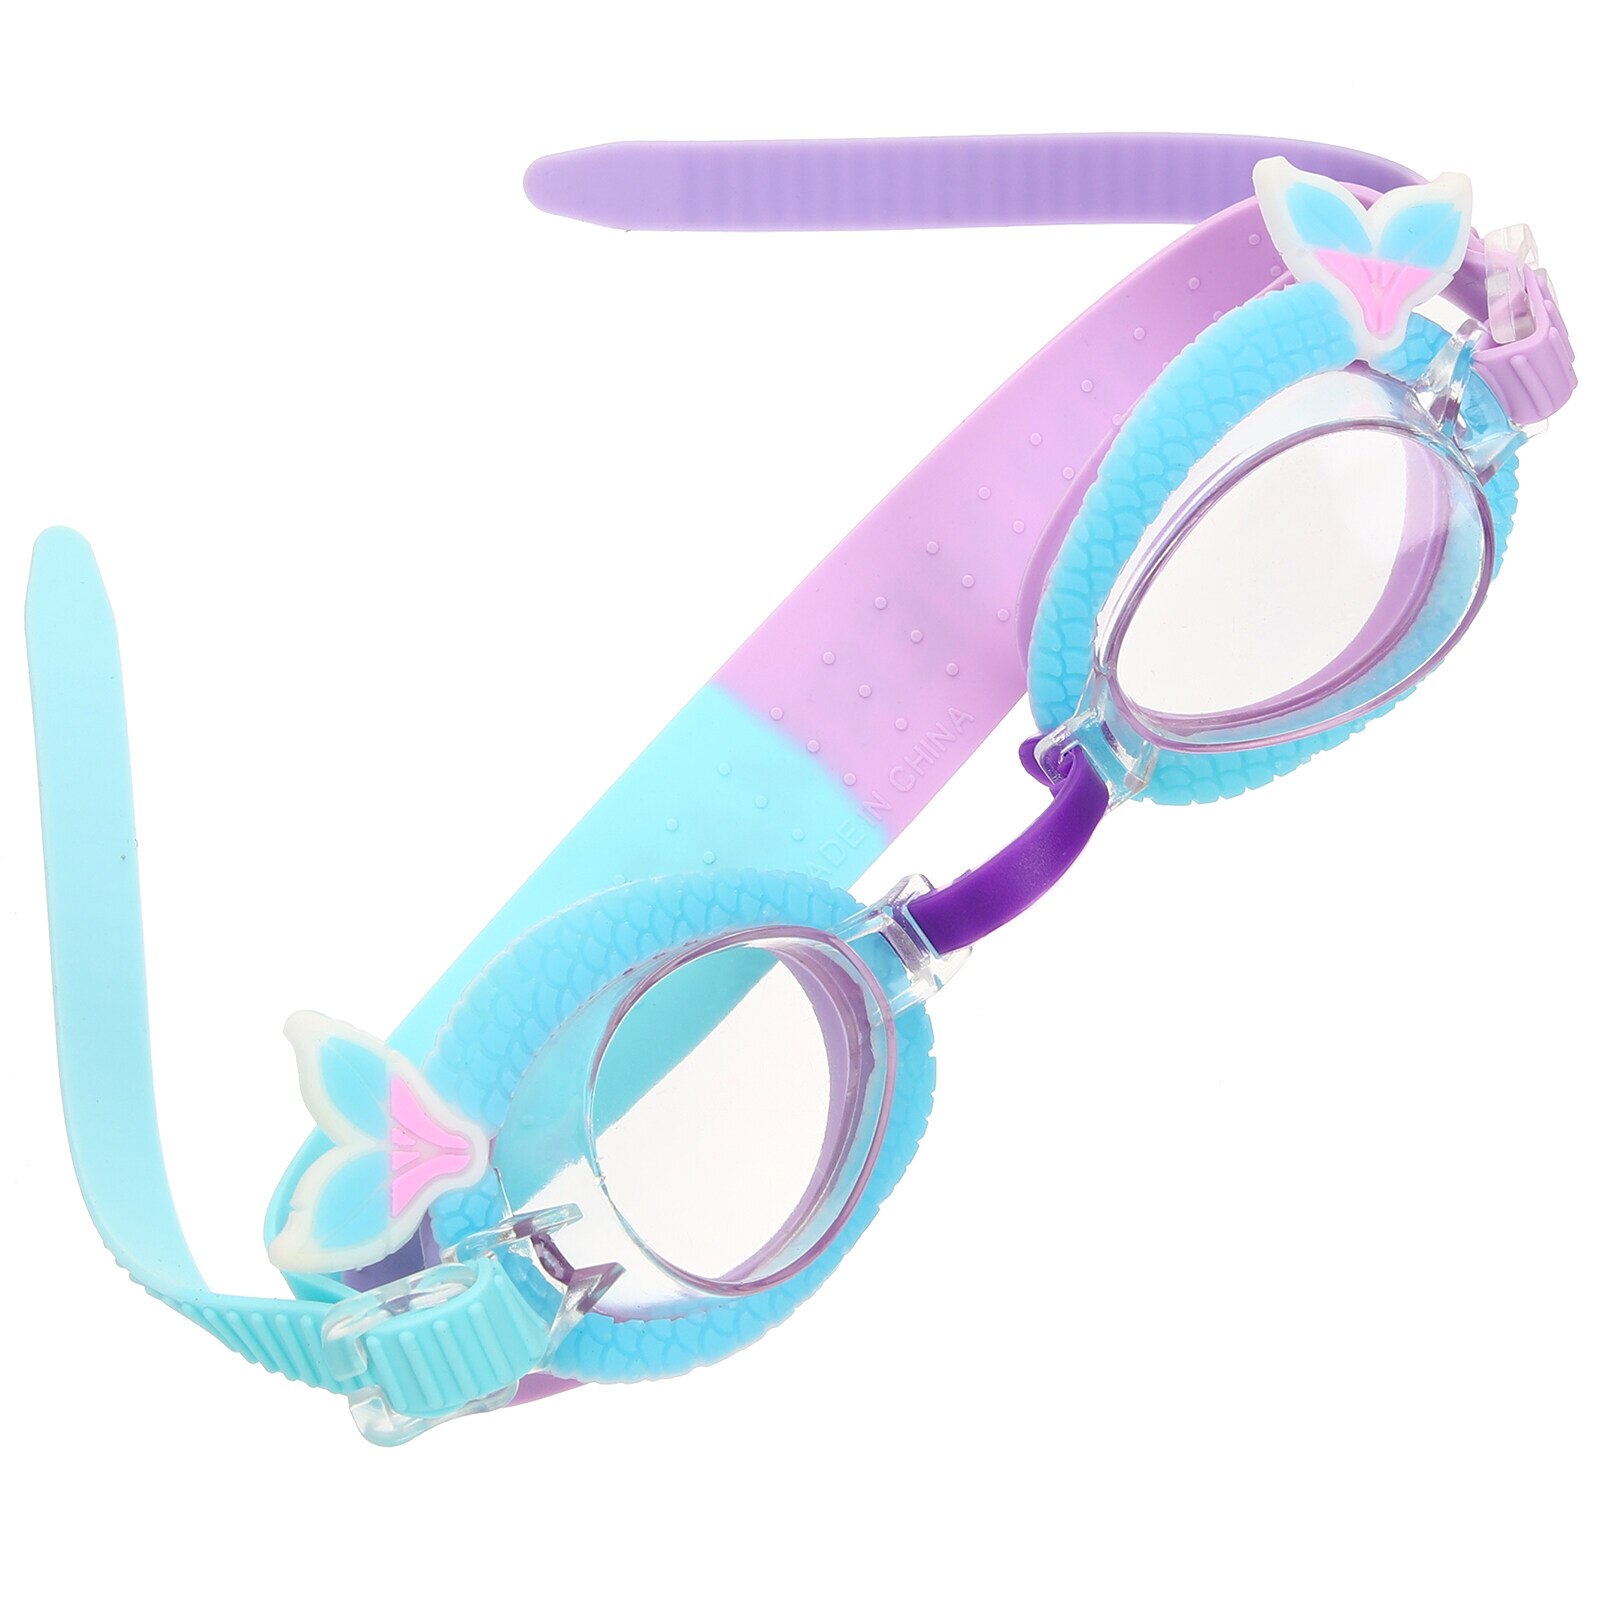 Mermaid Goggles Anti-Fog Swimming Lovely Silicone Children Kids Adorable